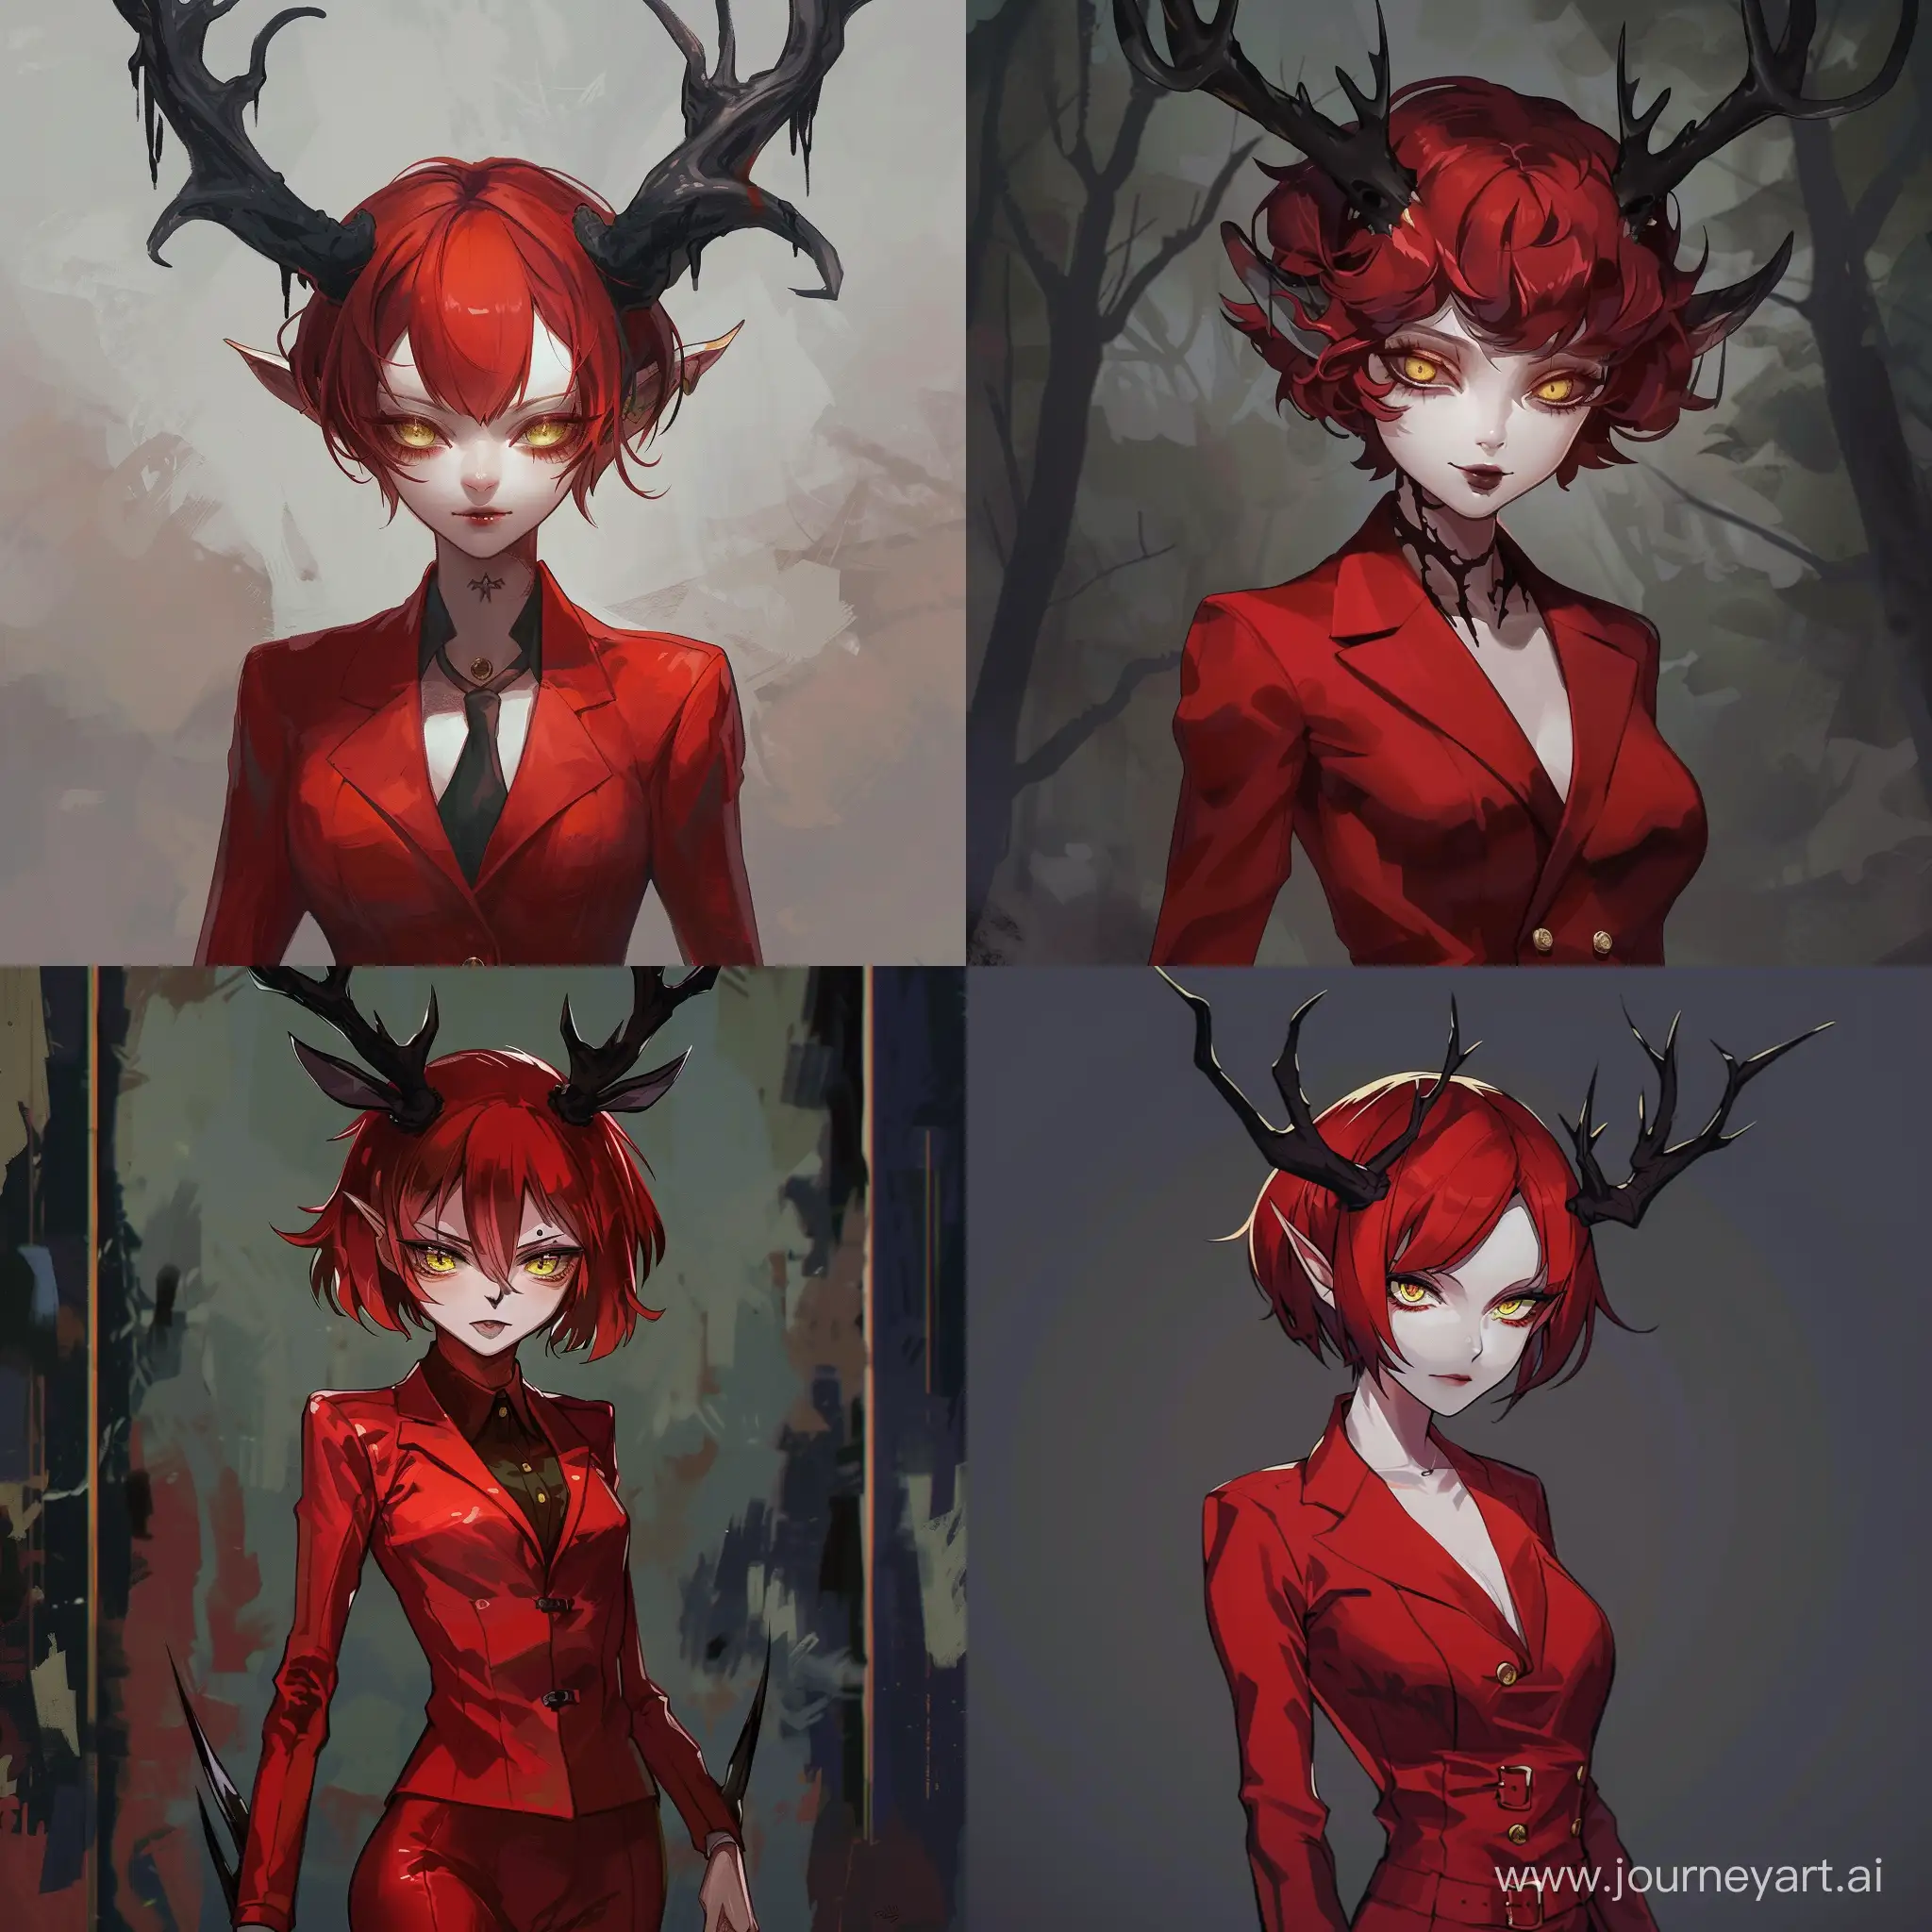 Demon girl with black deer's horns, red short hair, pale skin, yellow eyes, in red suit in anime style